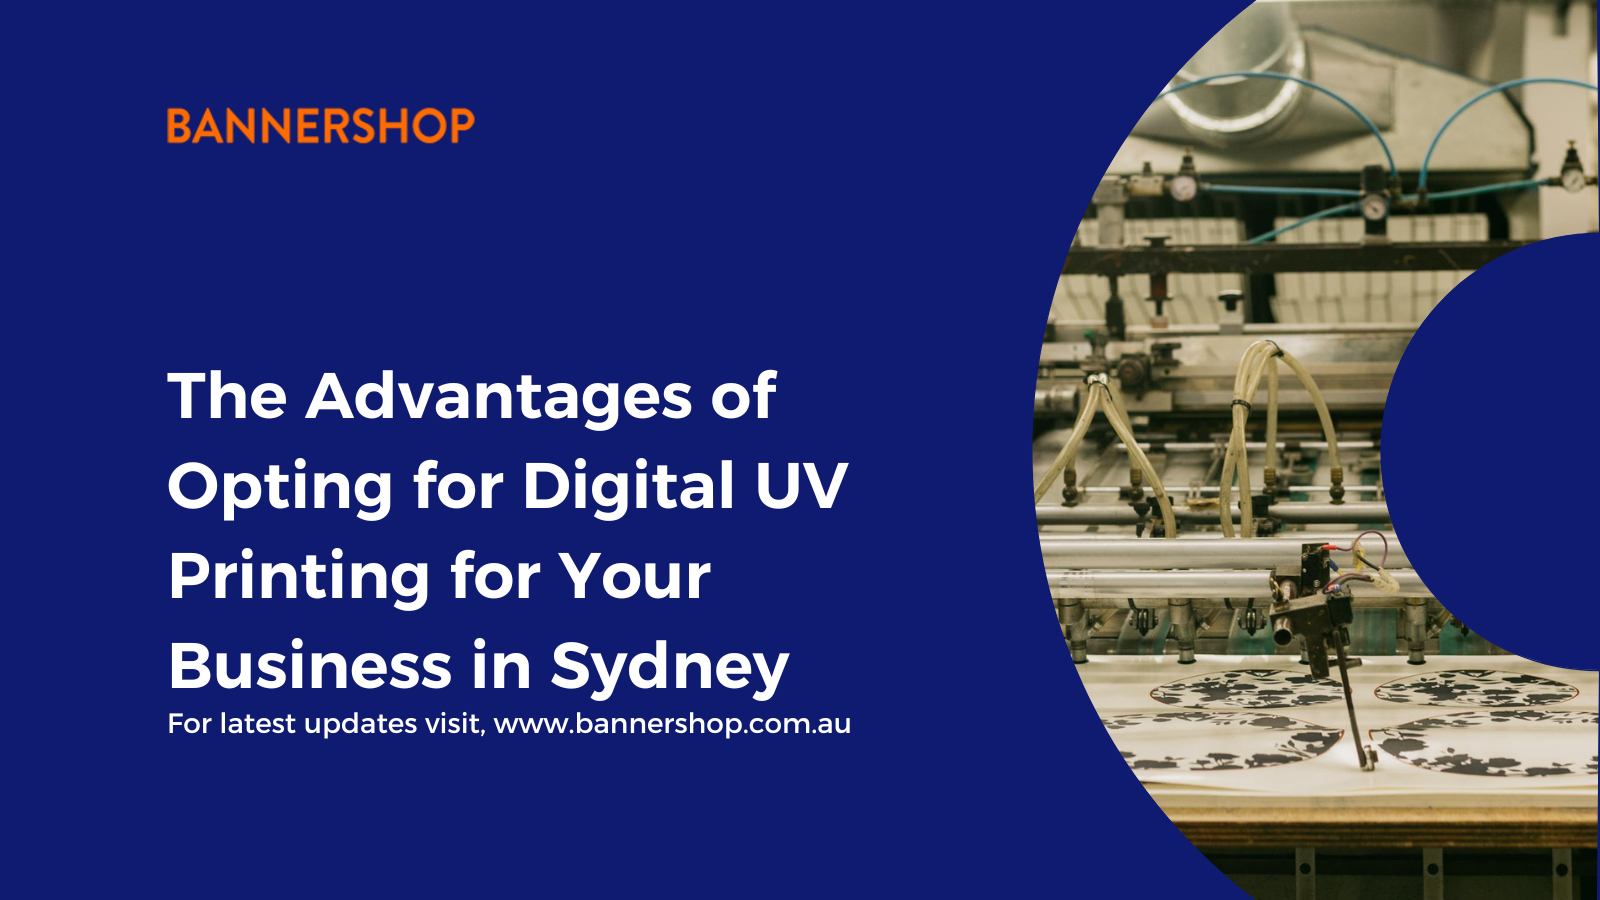 The Advantages of Opting for Digital UV Printing for Your Business in Sydney